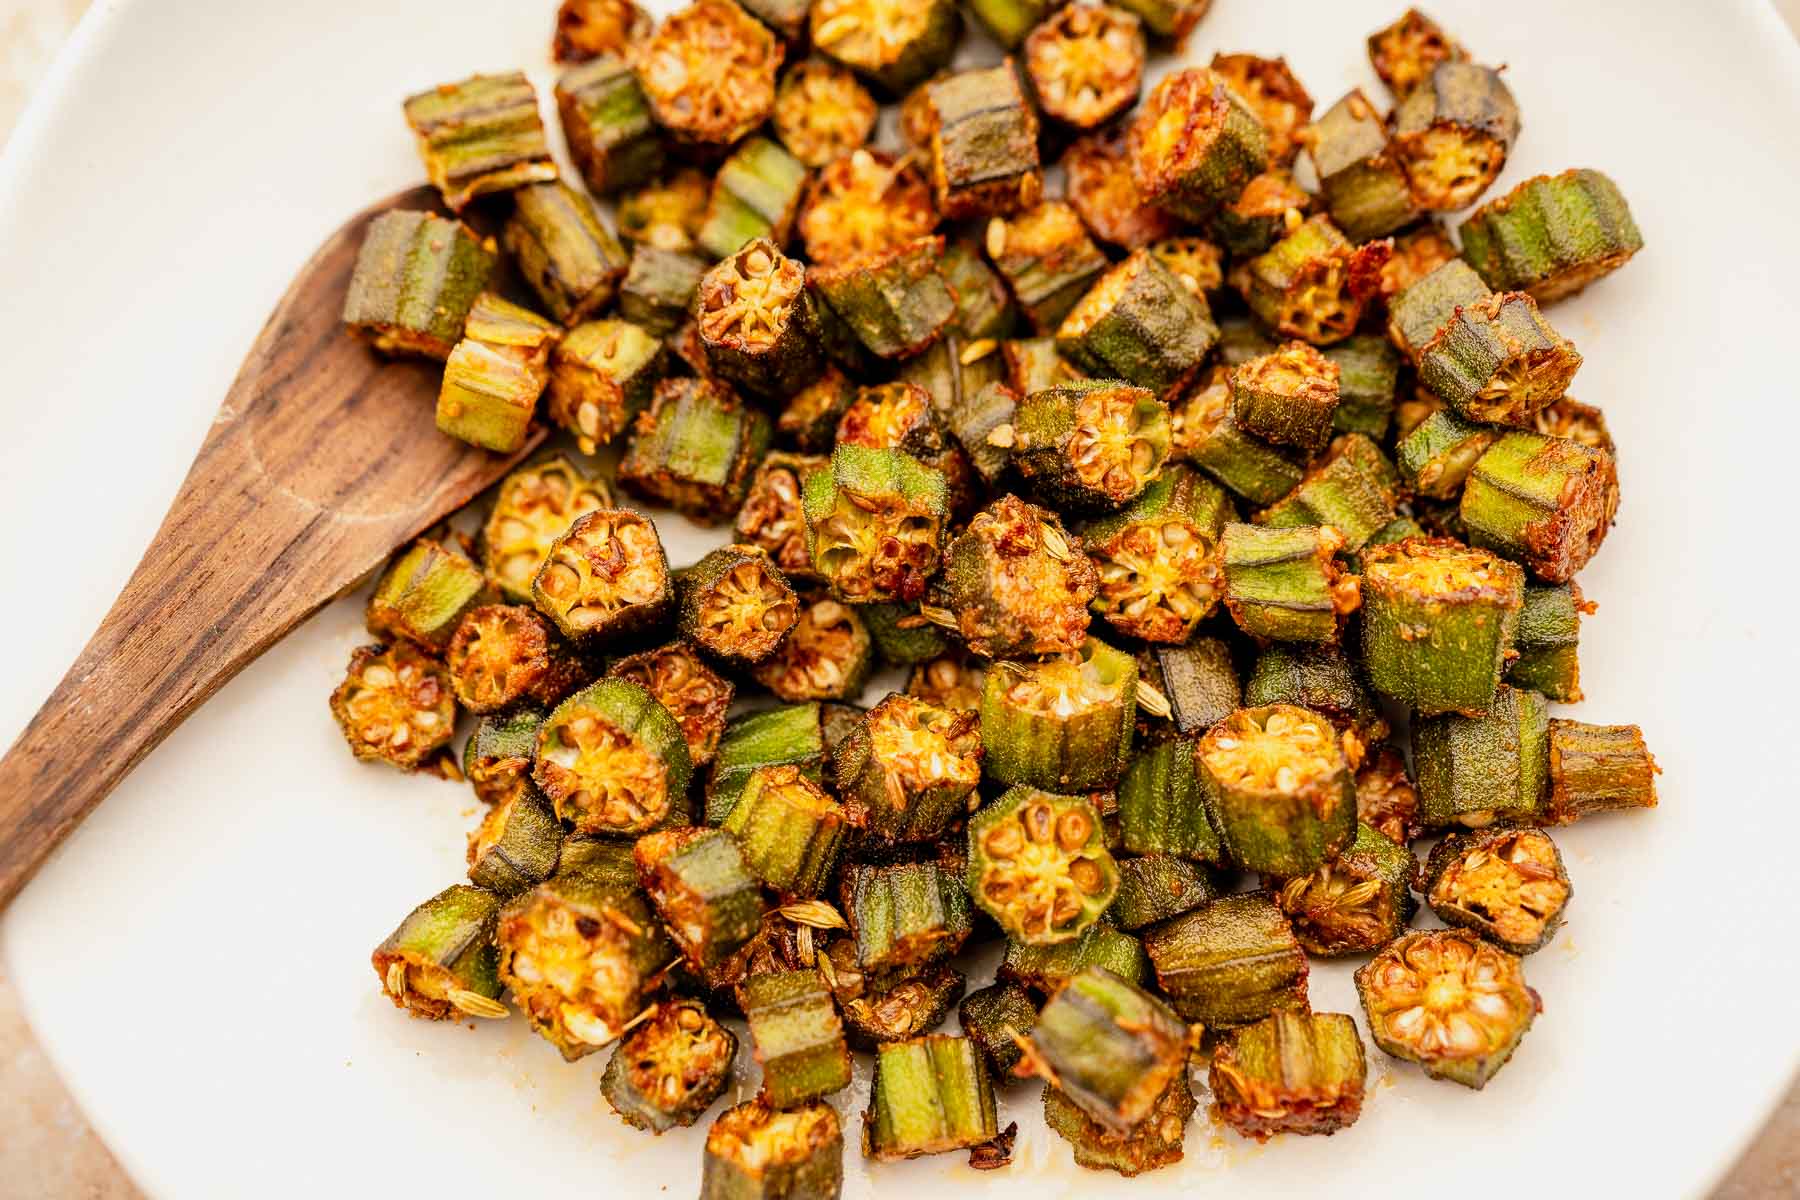 Sautéed chopped okra recipe in a dish with a wooden spoon.